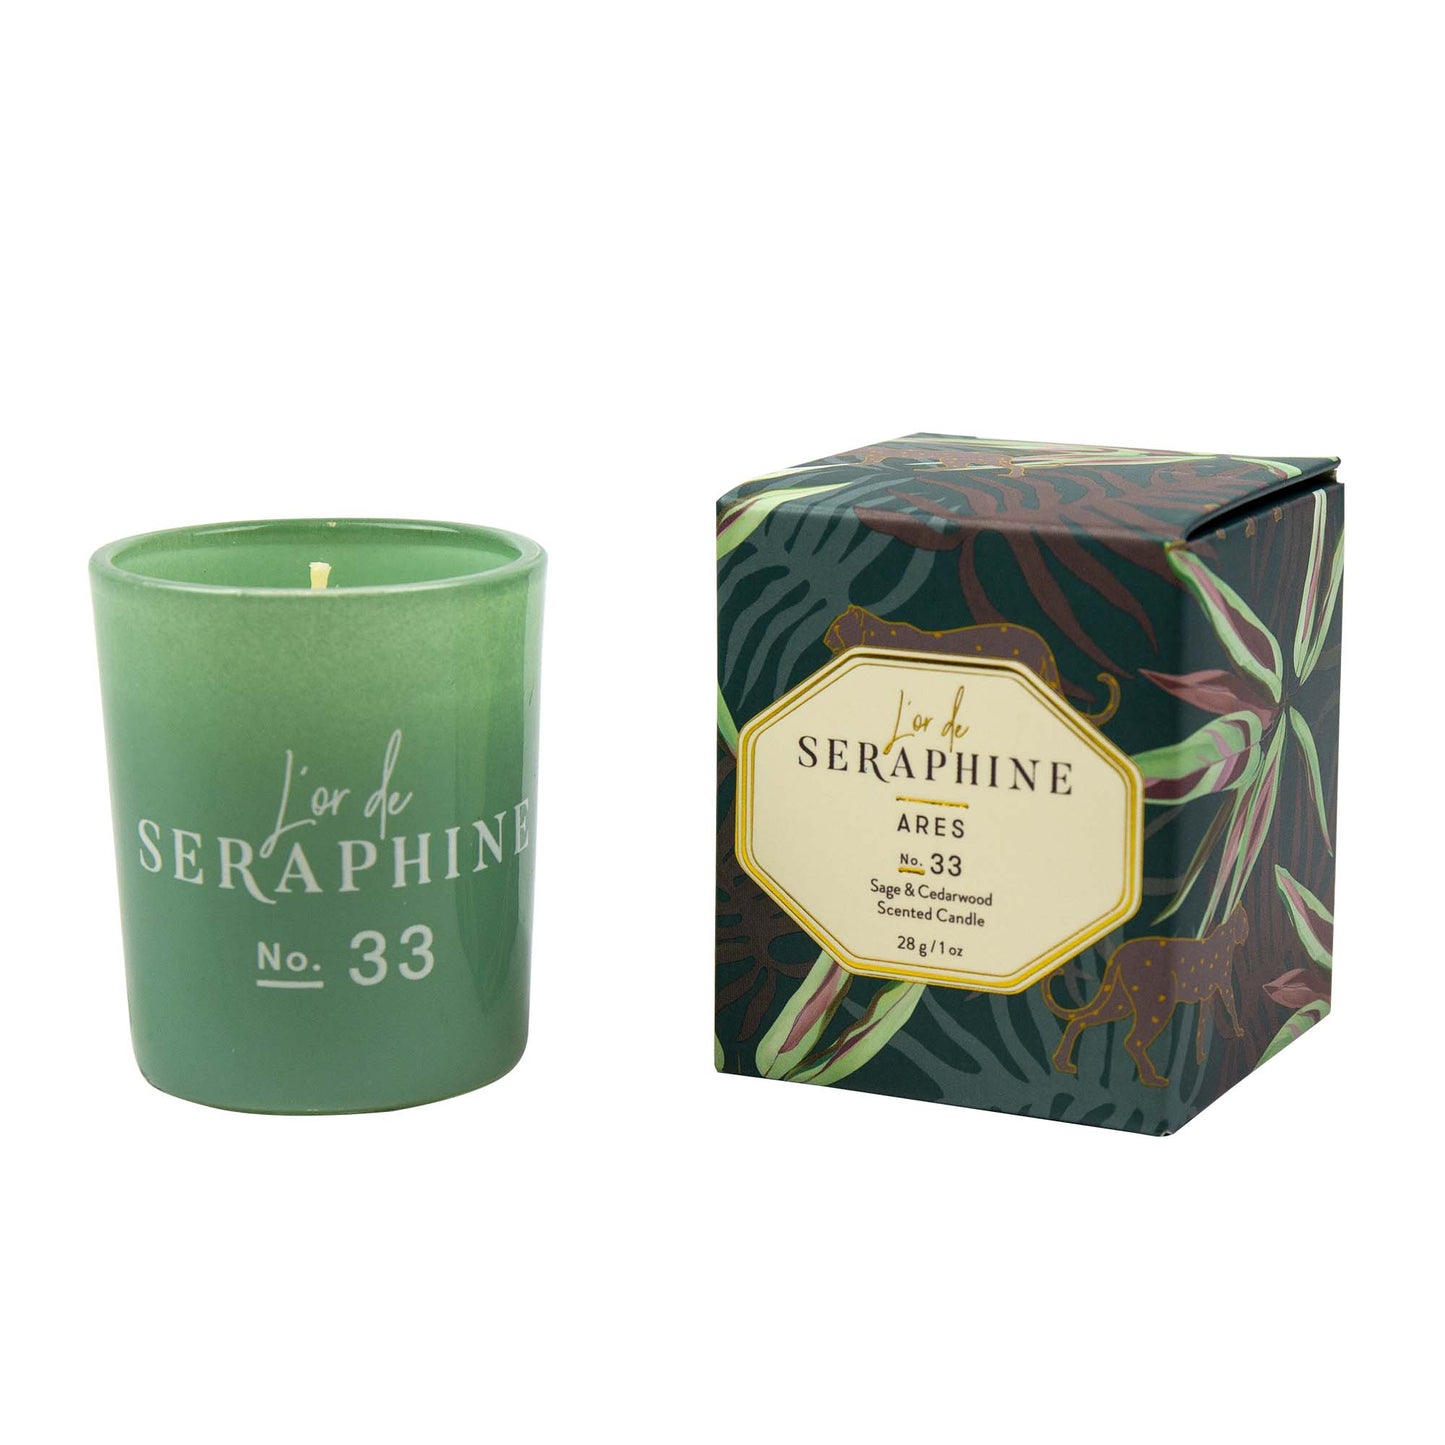 L'or de Seraphine GWP Assorted Candle (1 oz) #10084205